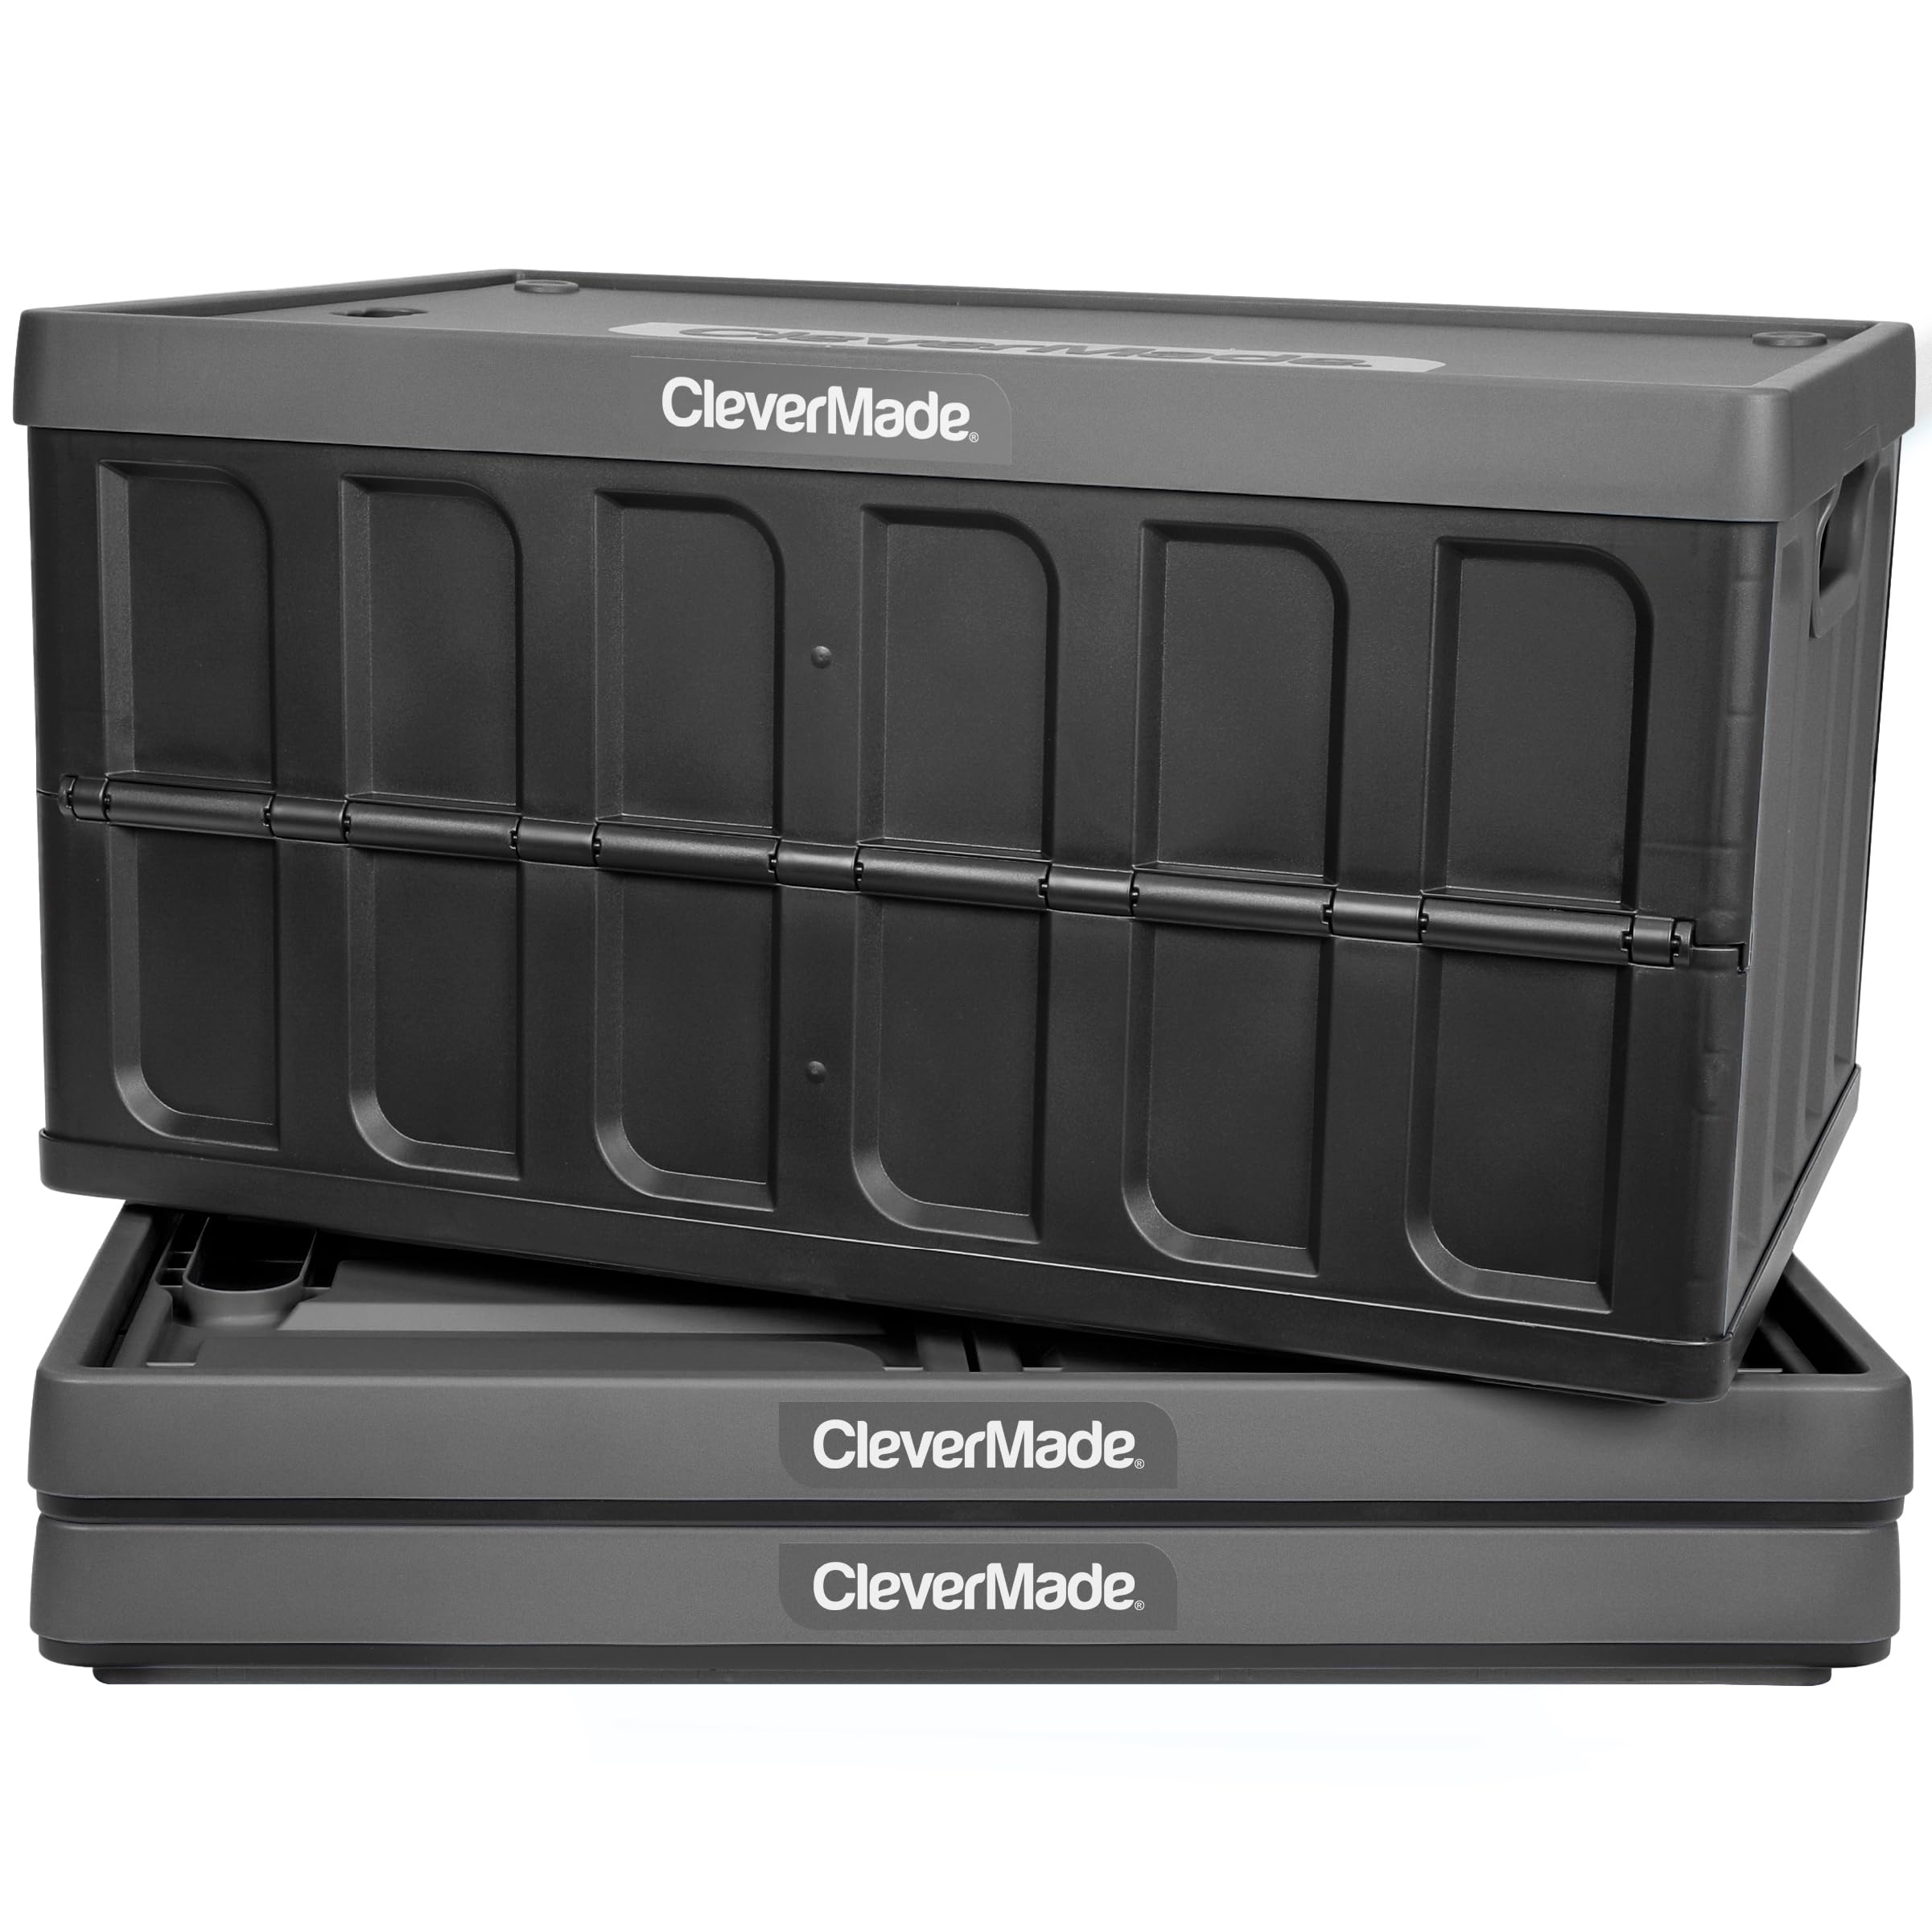 CleverMade Collapsible Storage Bin (With Lid), Charcoal, 3PK - 46L (12 Gal) Folding Plastic Stackable Utility Crates, Holds 75lbs Per Bin - Solid Wall CleverCrates for Organizing, Storage, Moving